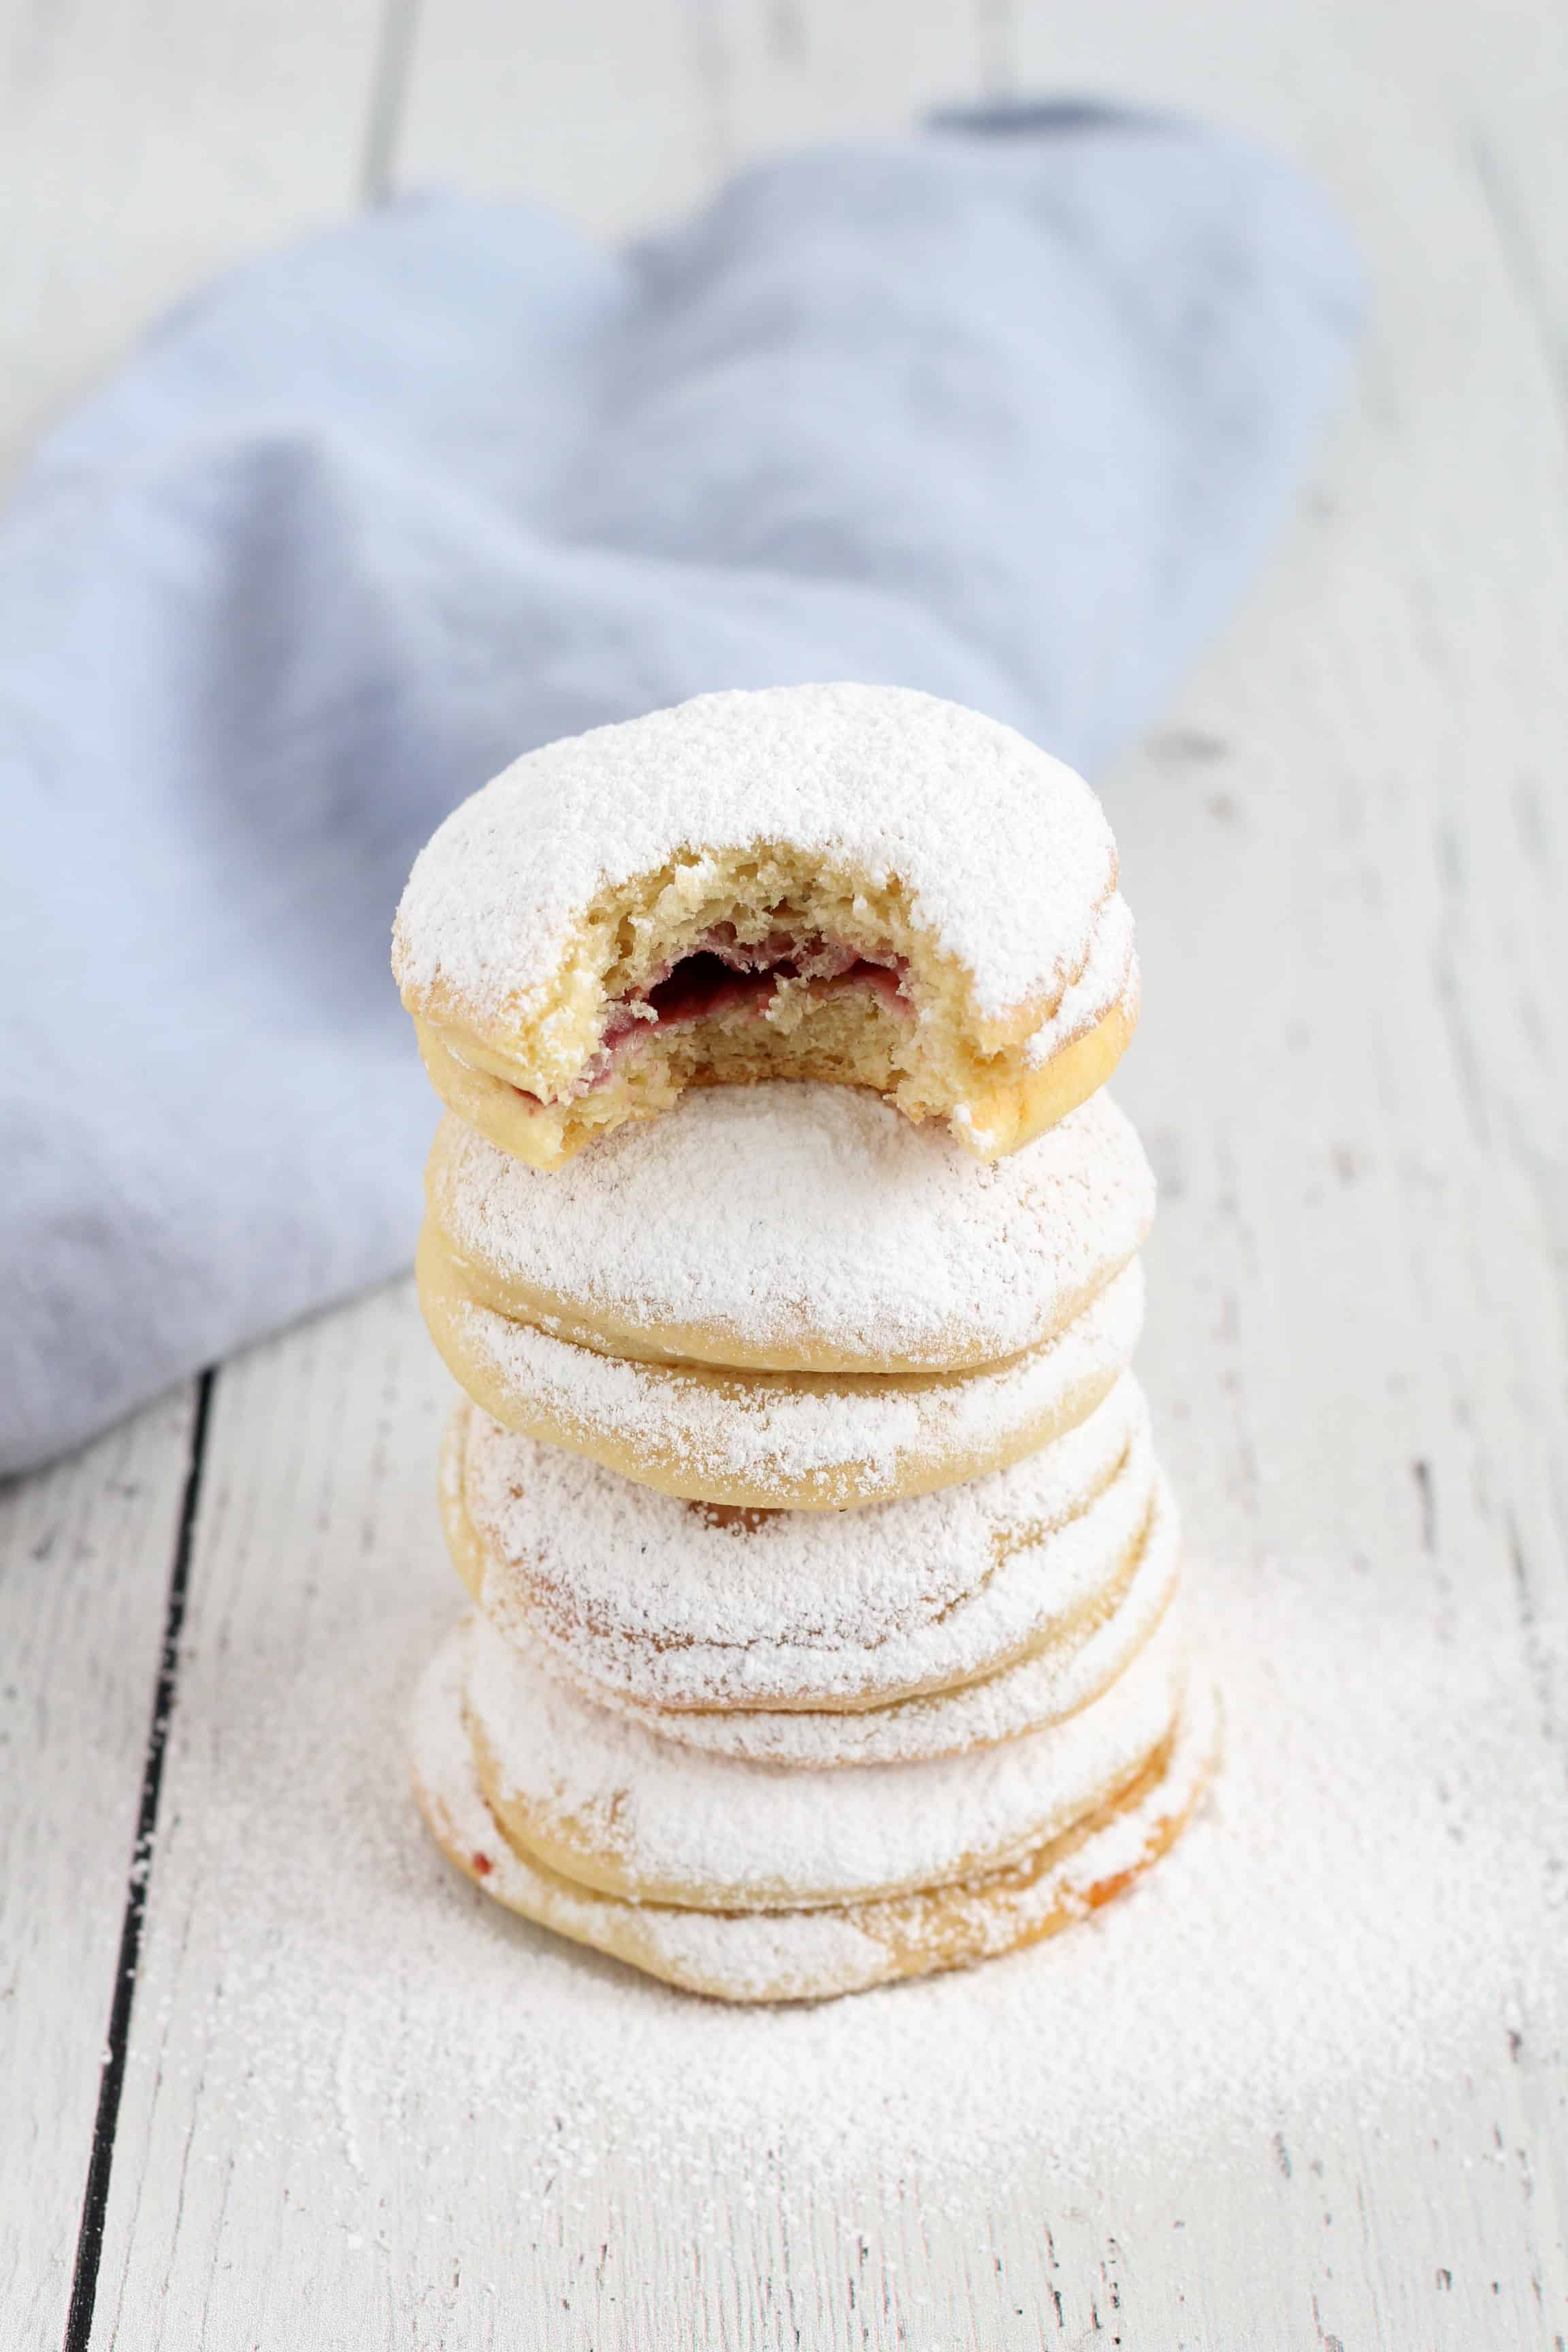 Baked donuts filled with raspberry jam